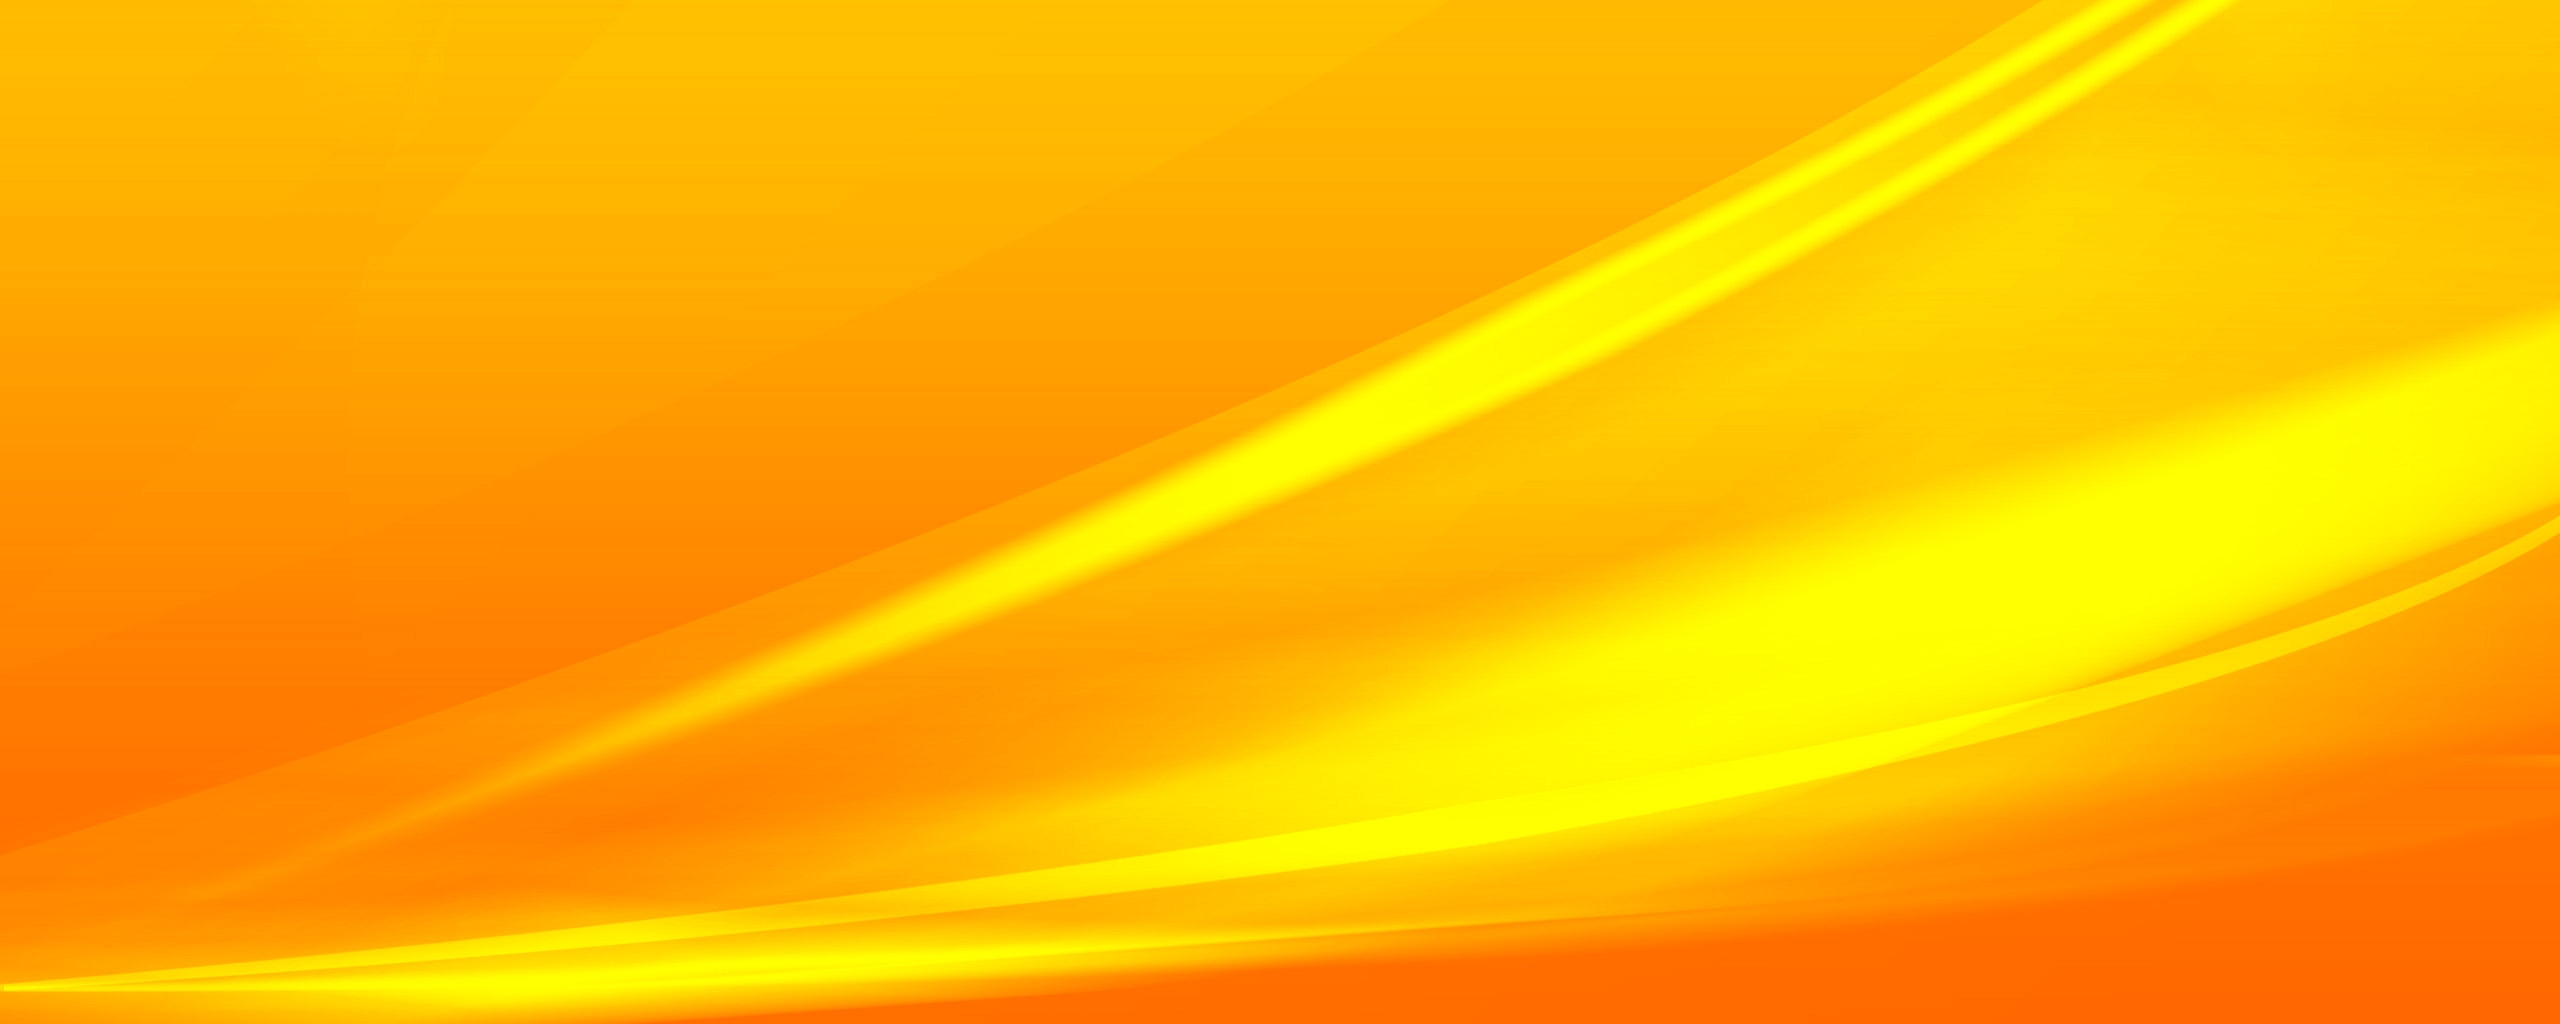 wide-yellow-abstract-wallpaper.jpg